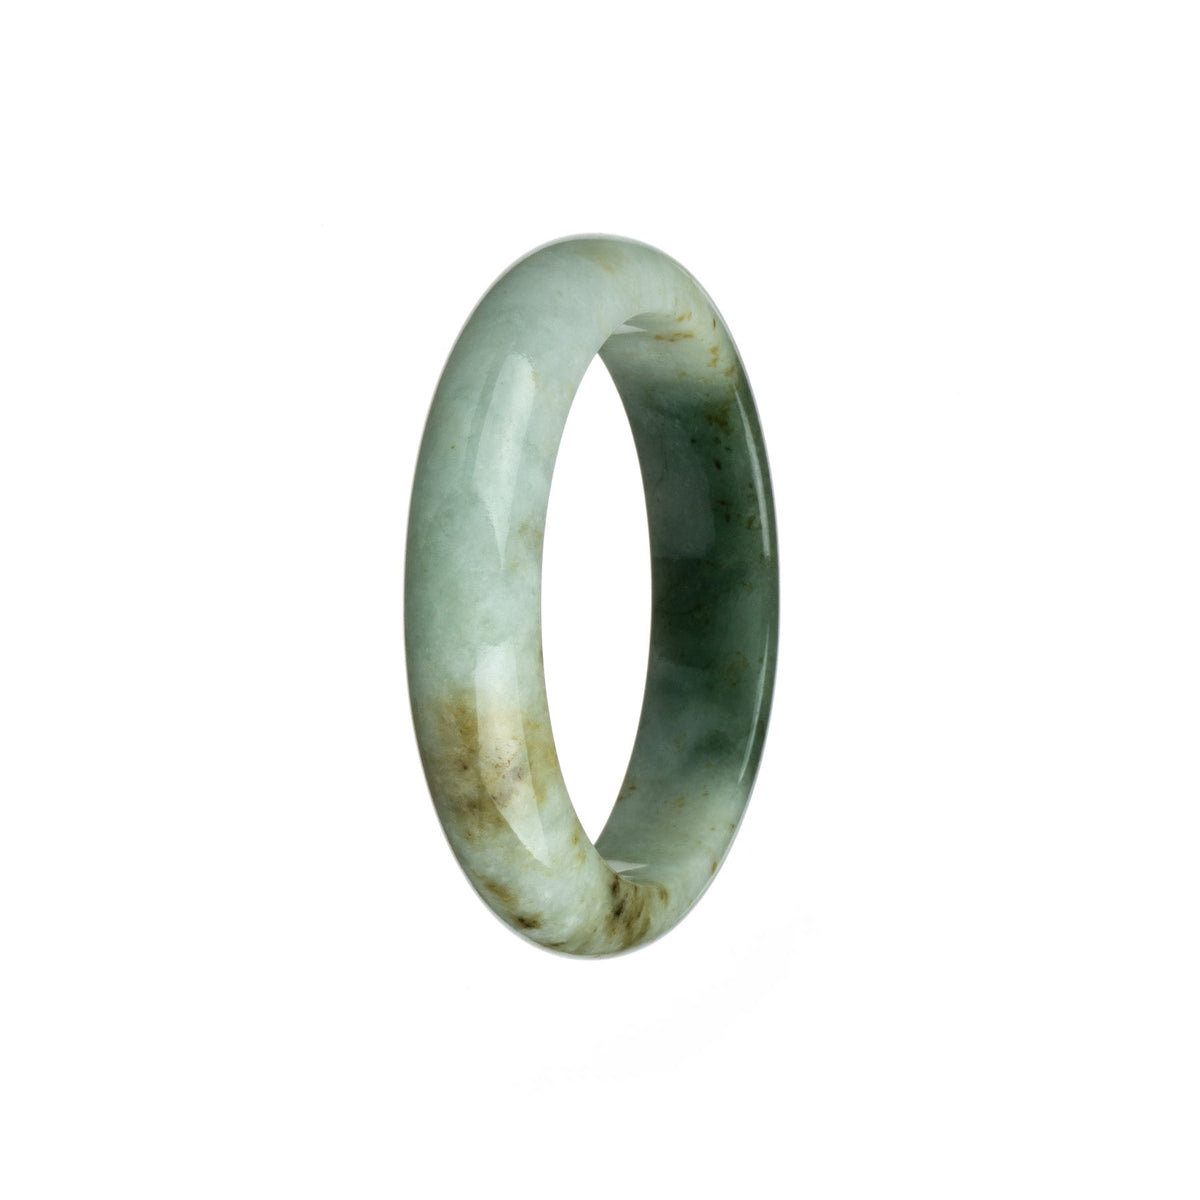 A close-up image of a beautiful jade bracelet. The bracelet is made of genuine white and green jade stones, arranged in a traditional design. It features a 53mm half moon shape, with intricate details and a smooth finish. The bracelet is from the brand MAYS.